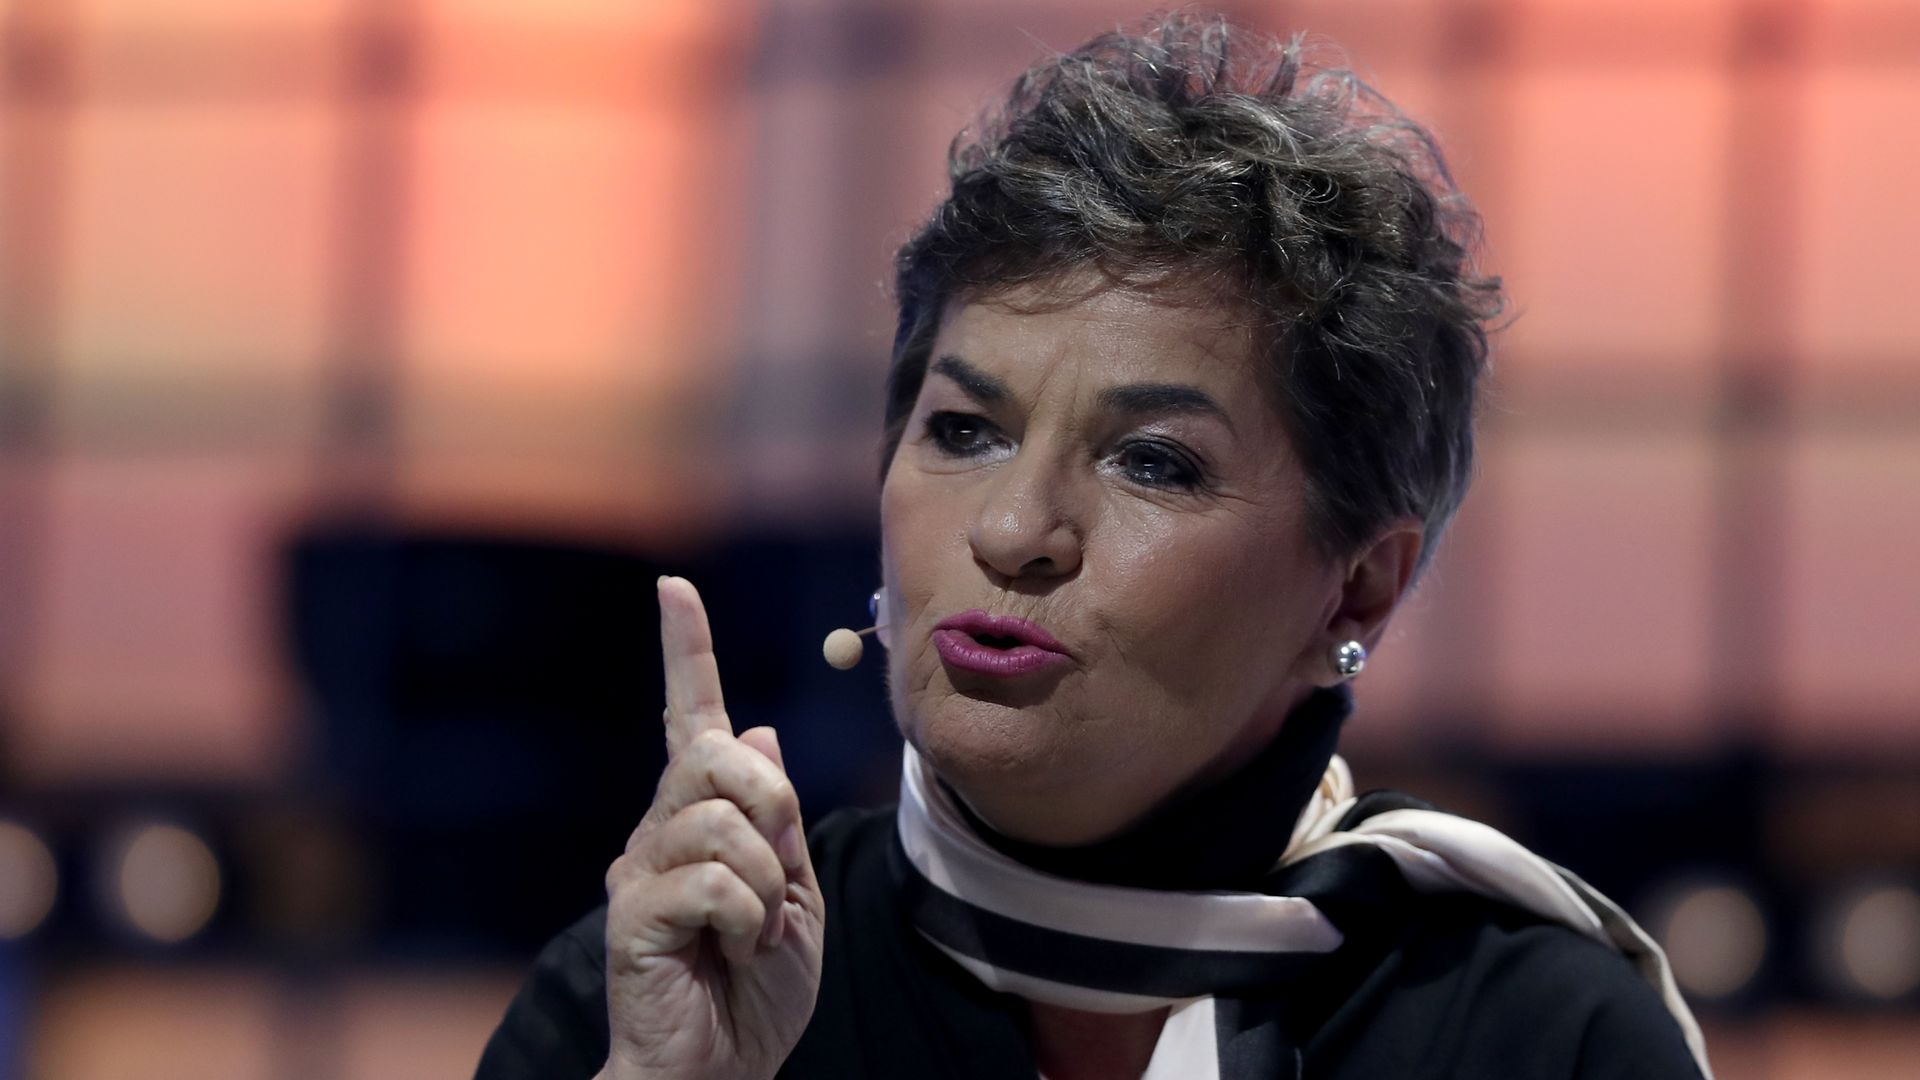 Paris Climate Accord architect Christiana Figueres speaks at the 2019 Web Summit